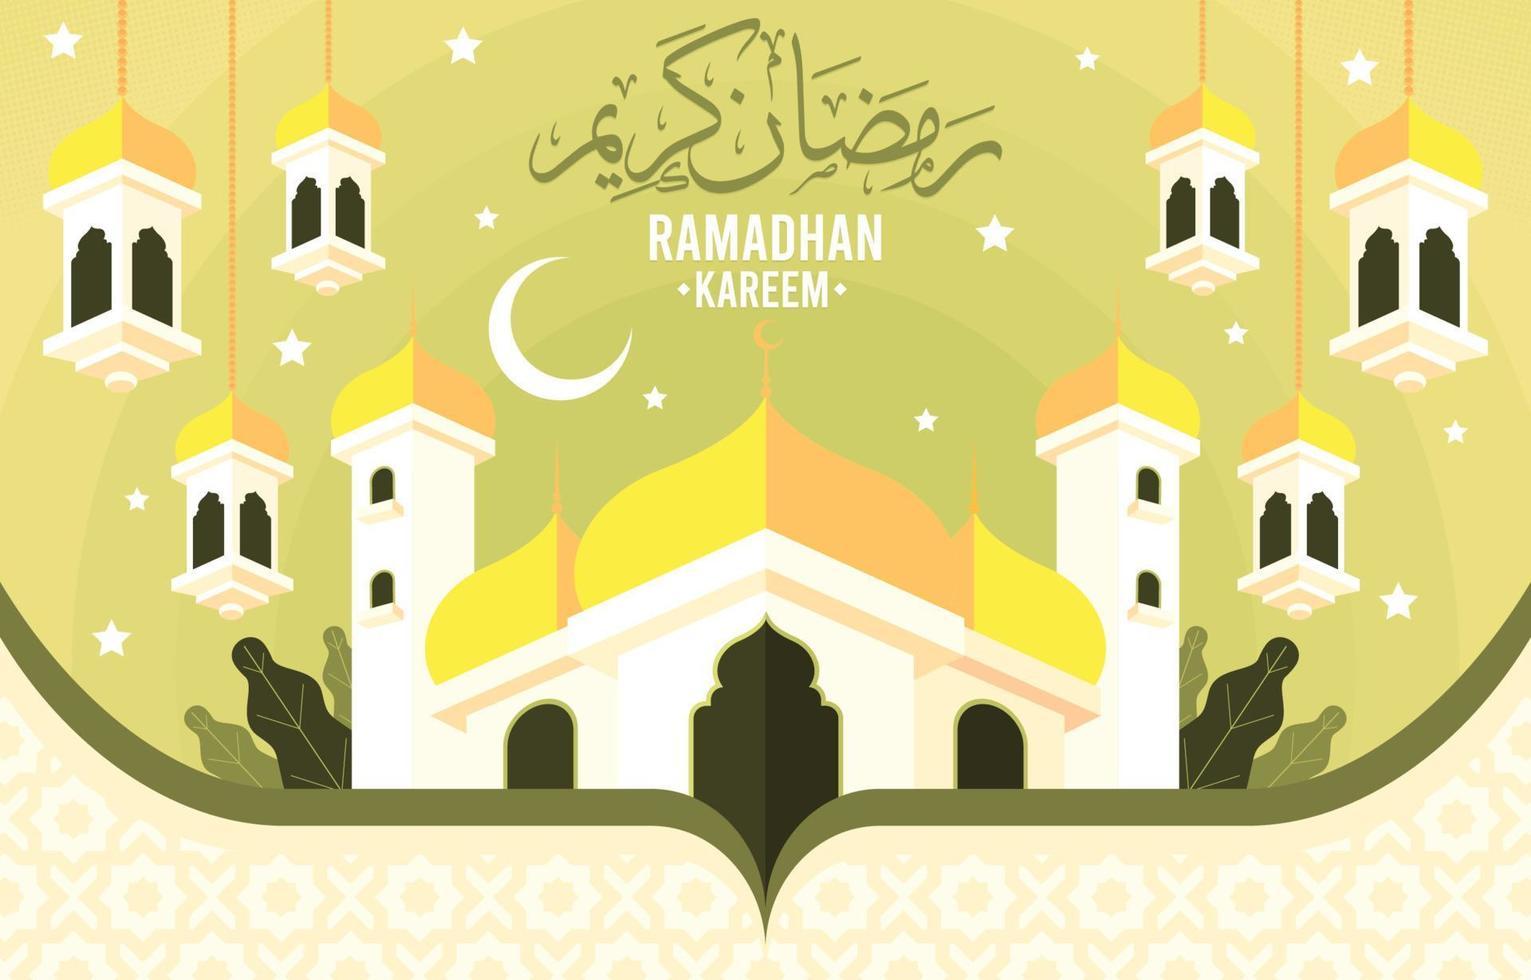 Ramadhan Mosque and Lantern in Flat Design vector